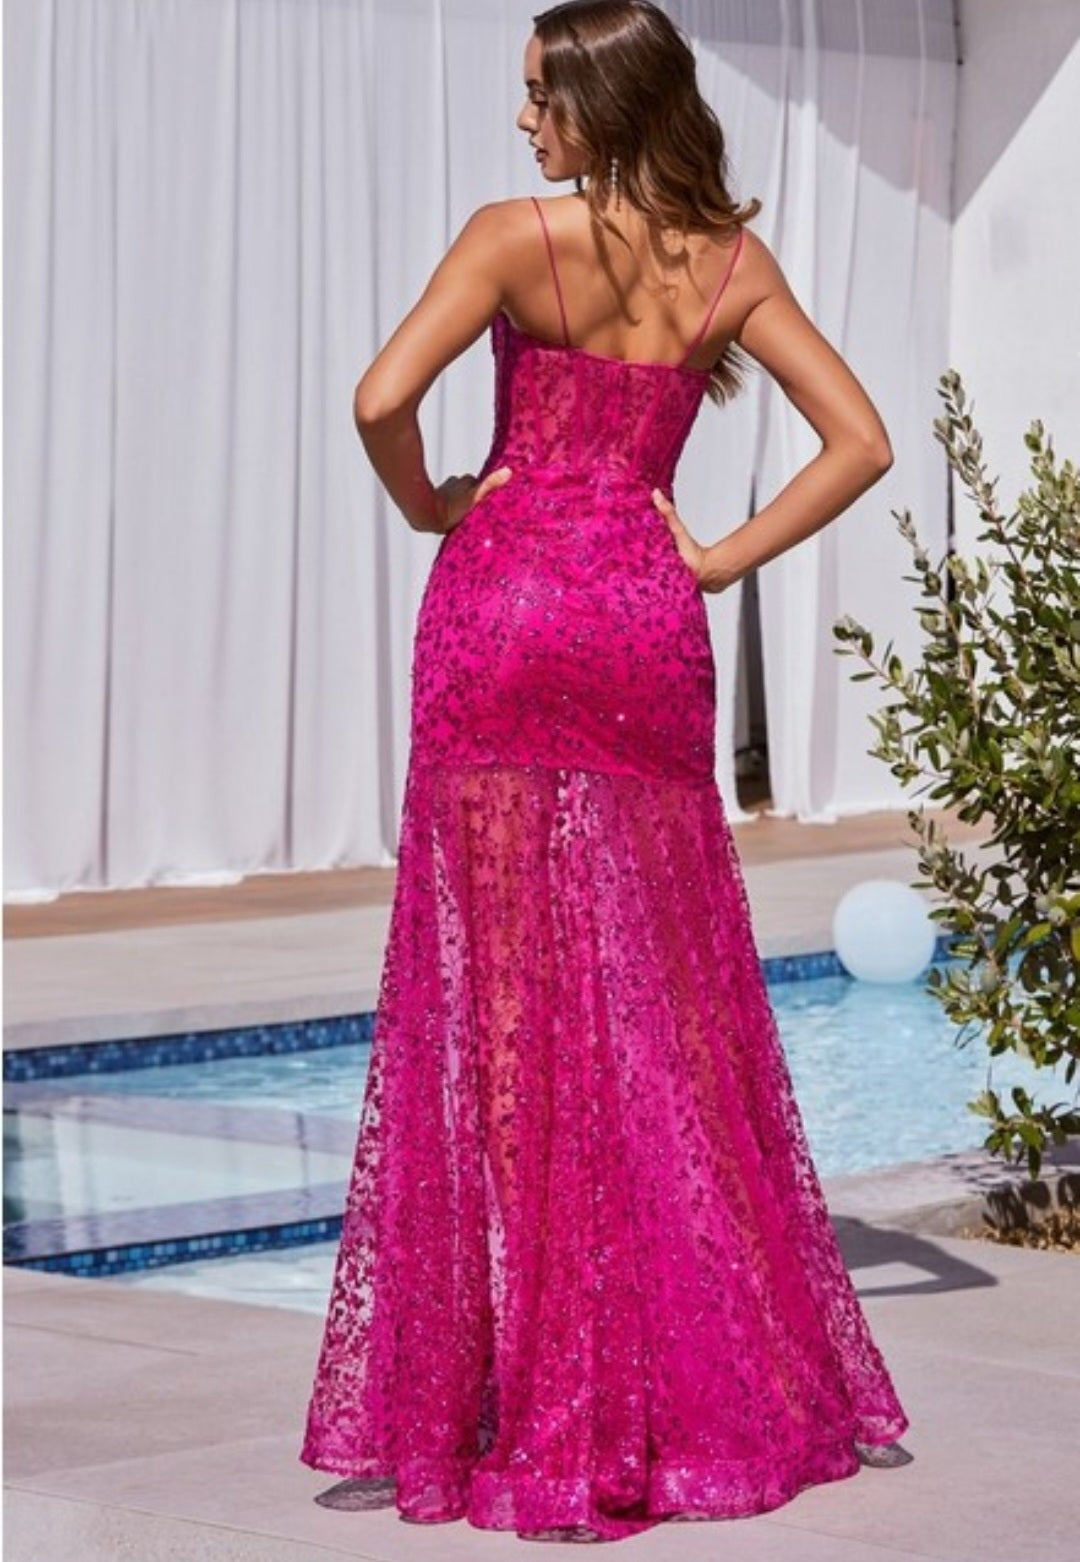 GLITTER PRINTED CORSET GOWN